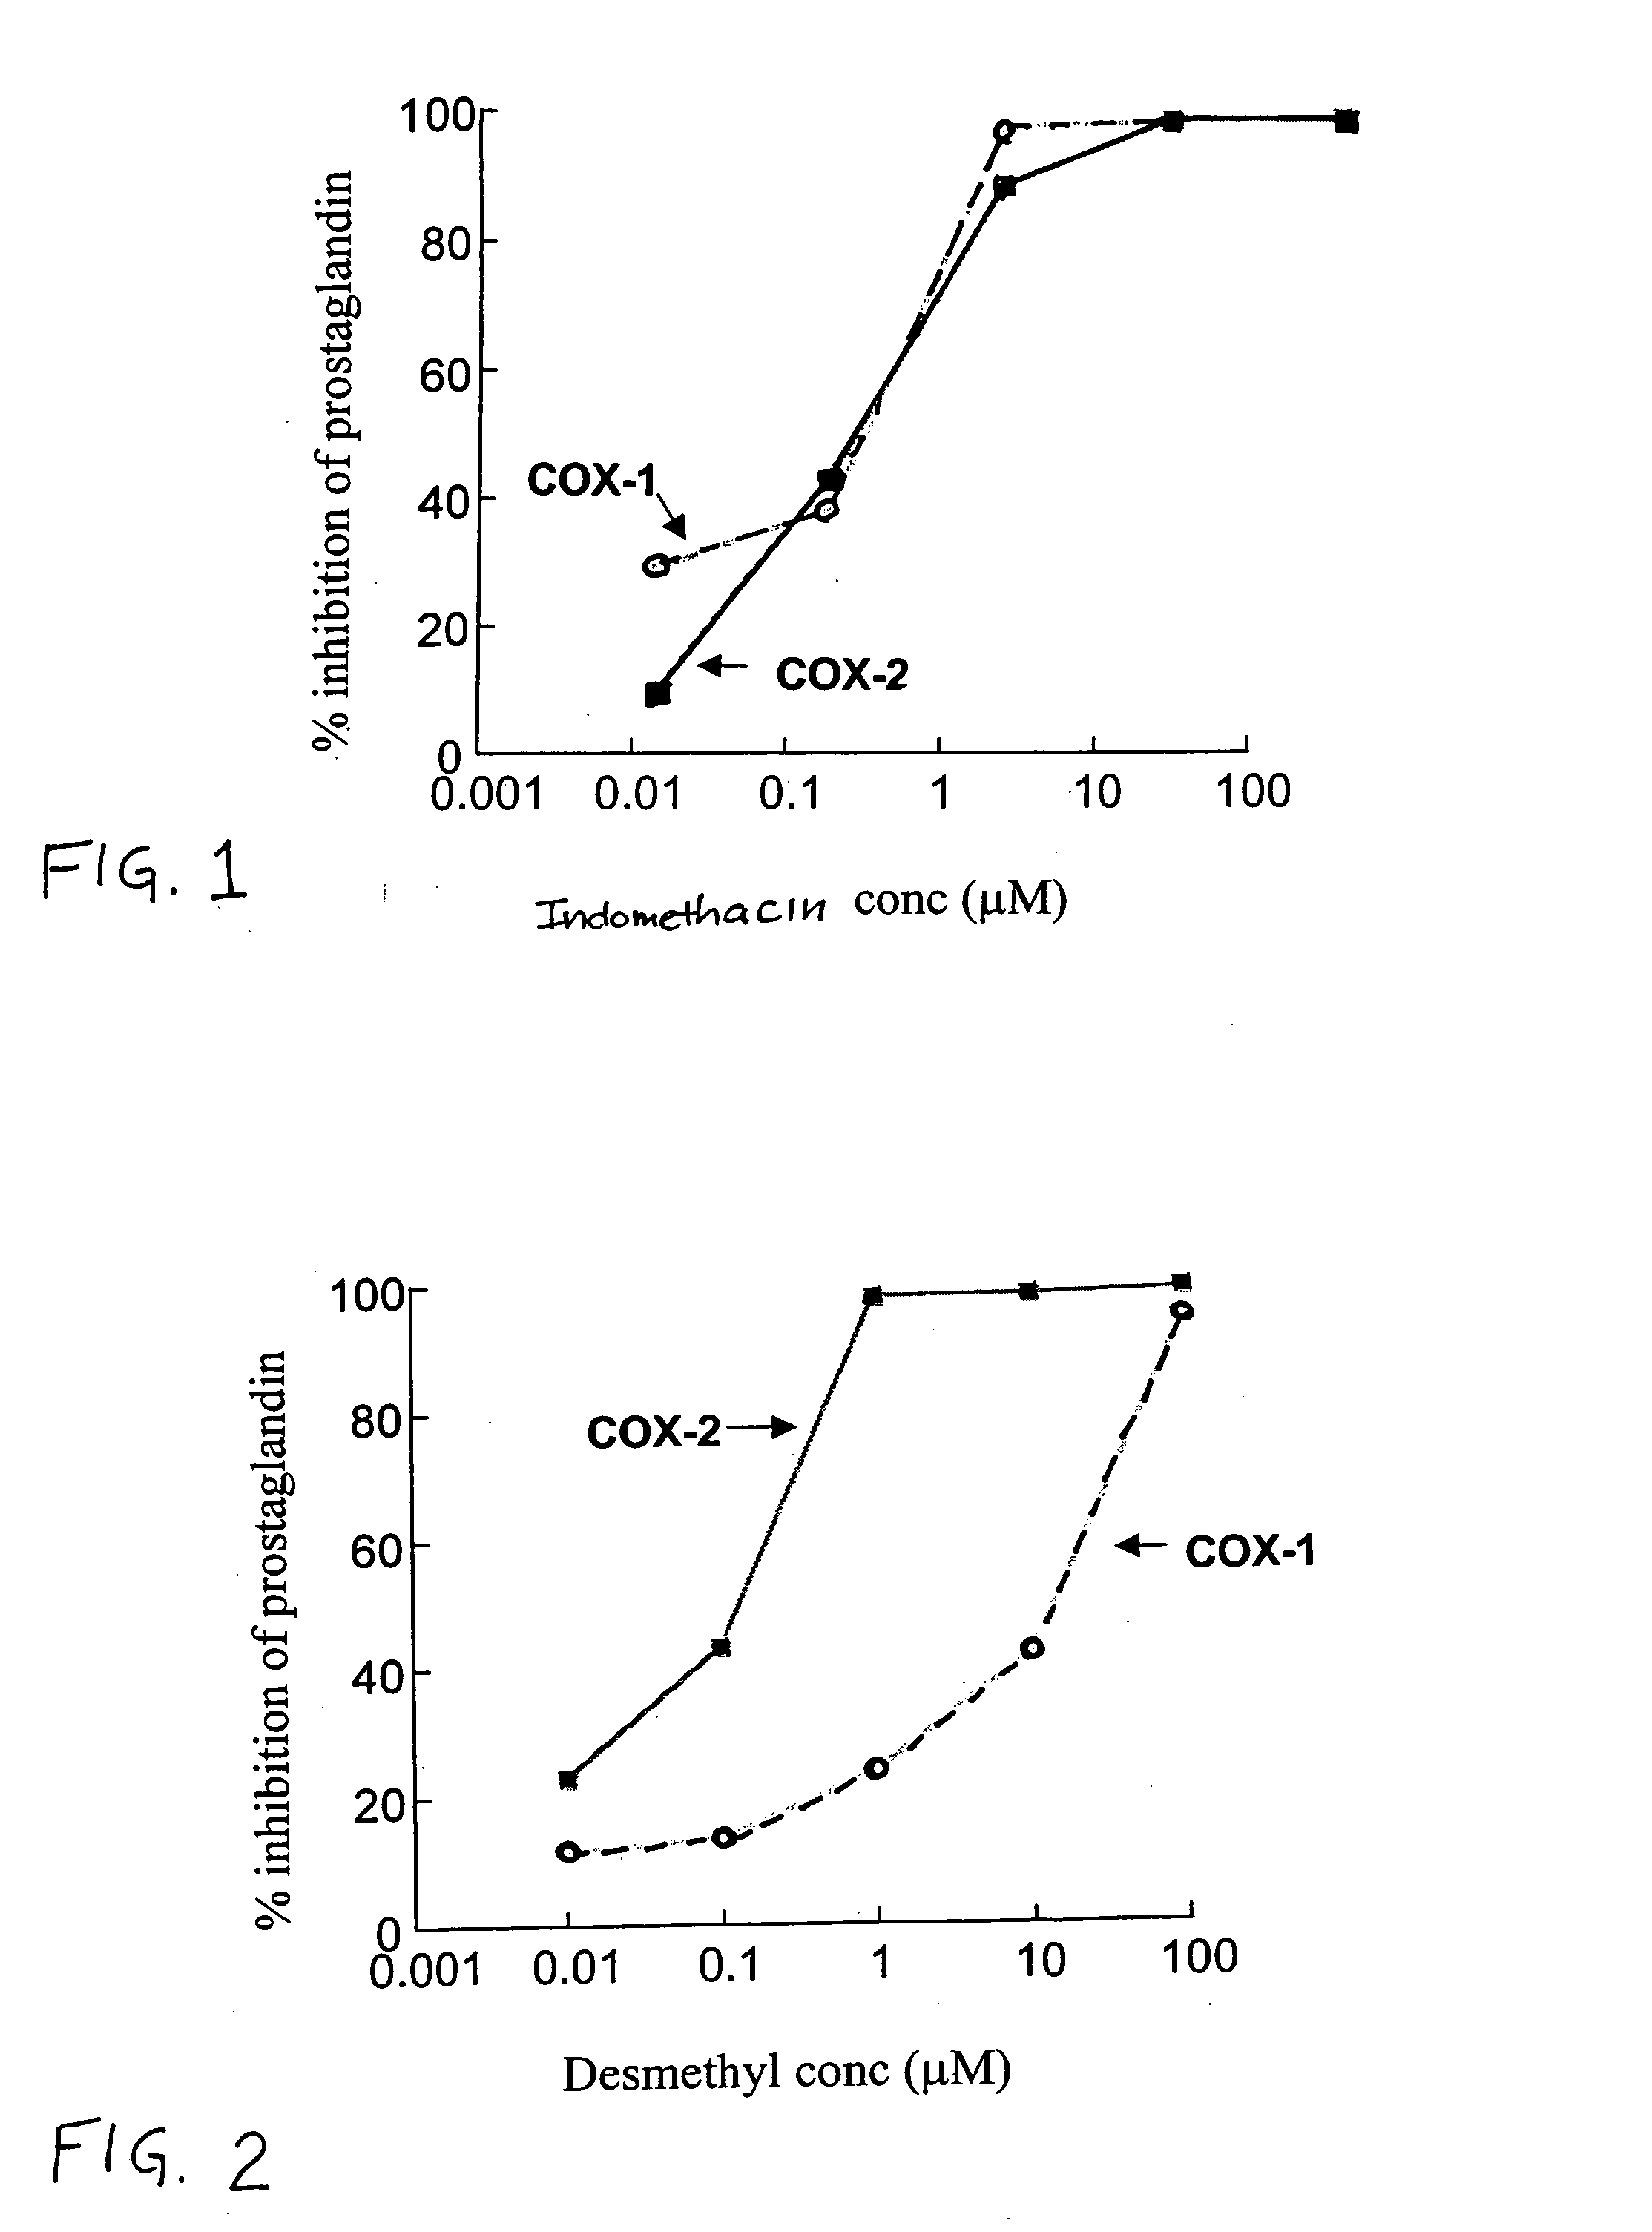 COX-2 and FAAH inhibitors